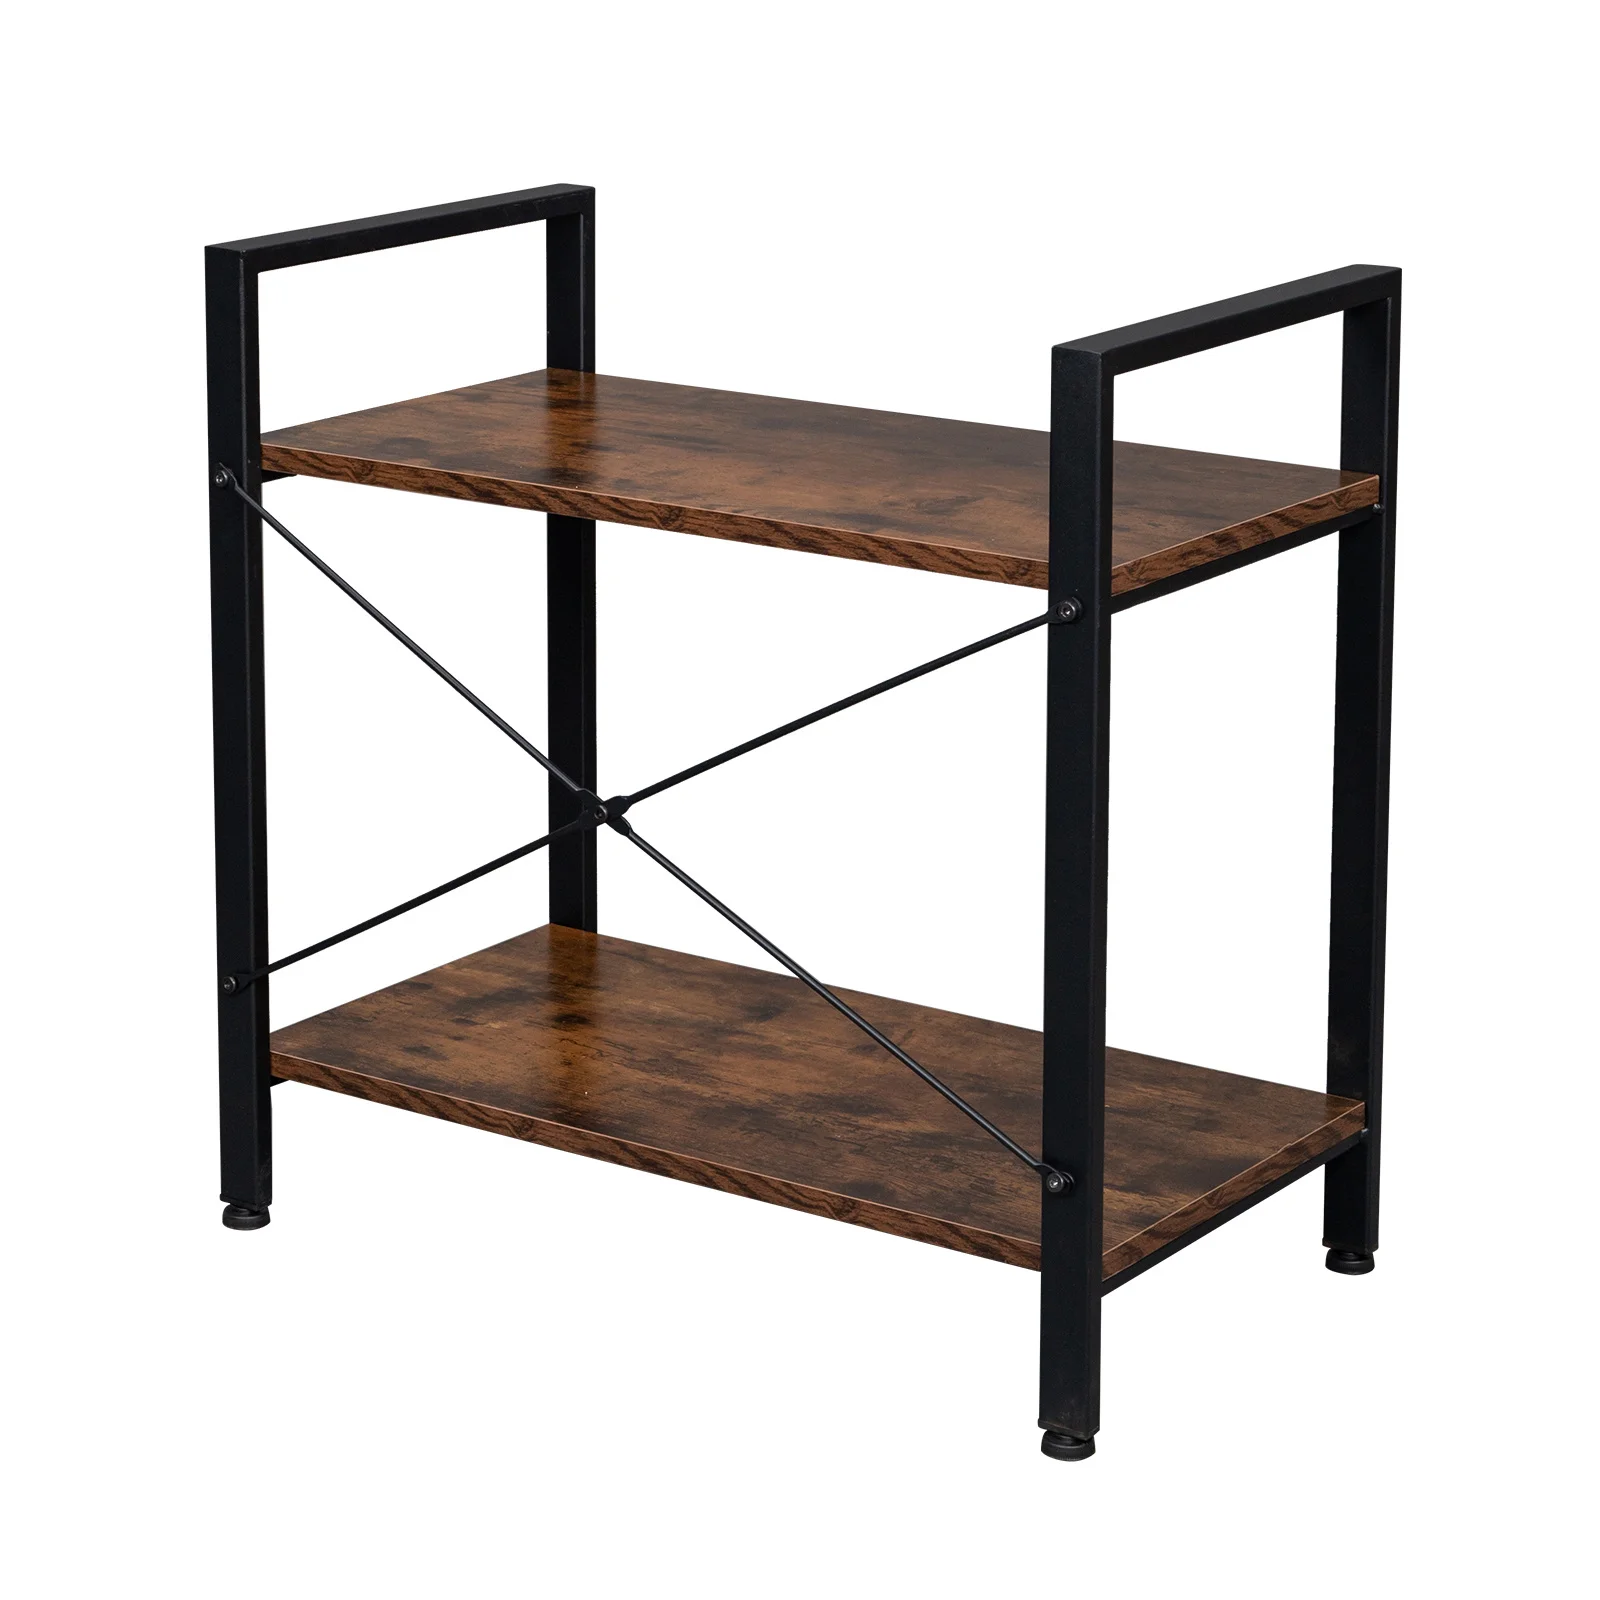 

US Vintage Bookshelf 2 Tier Bookcase Modern Narrow Book Shelf and Book Case Industrial Wood Shelving Unit for Living Room